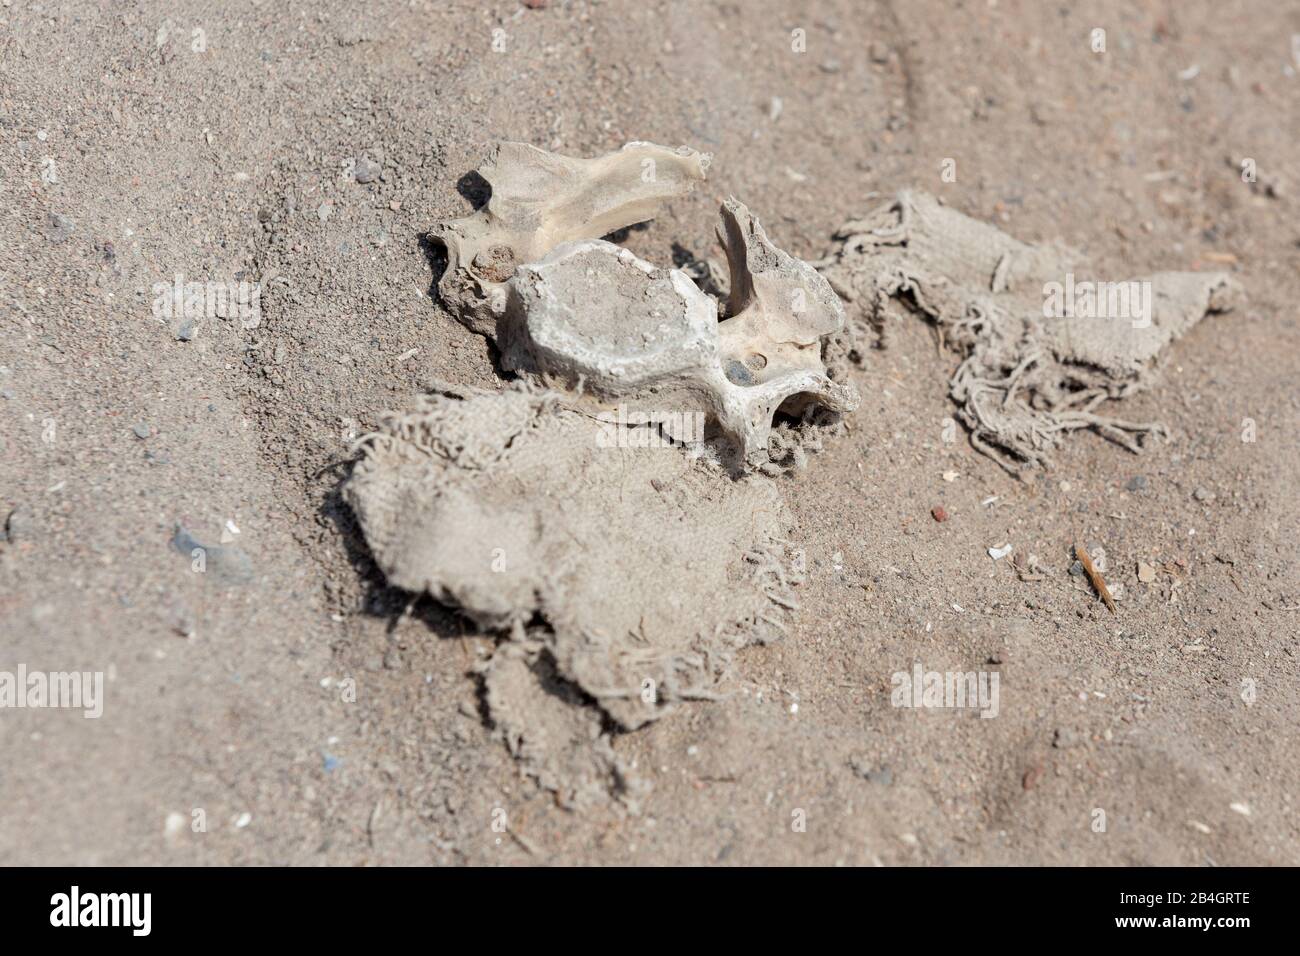 Fragments of cloth and bone remains from past civilizations laying on the desert sand in the archeological site of Pachacamac, Peru. Stock Photo